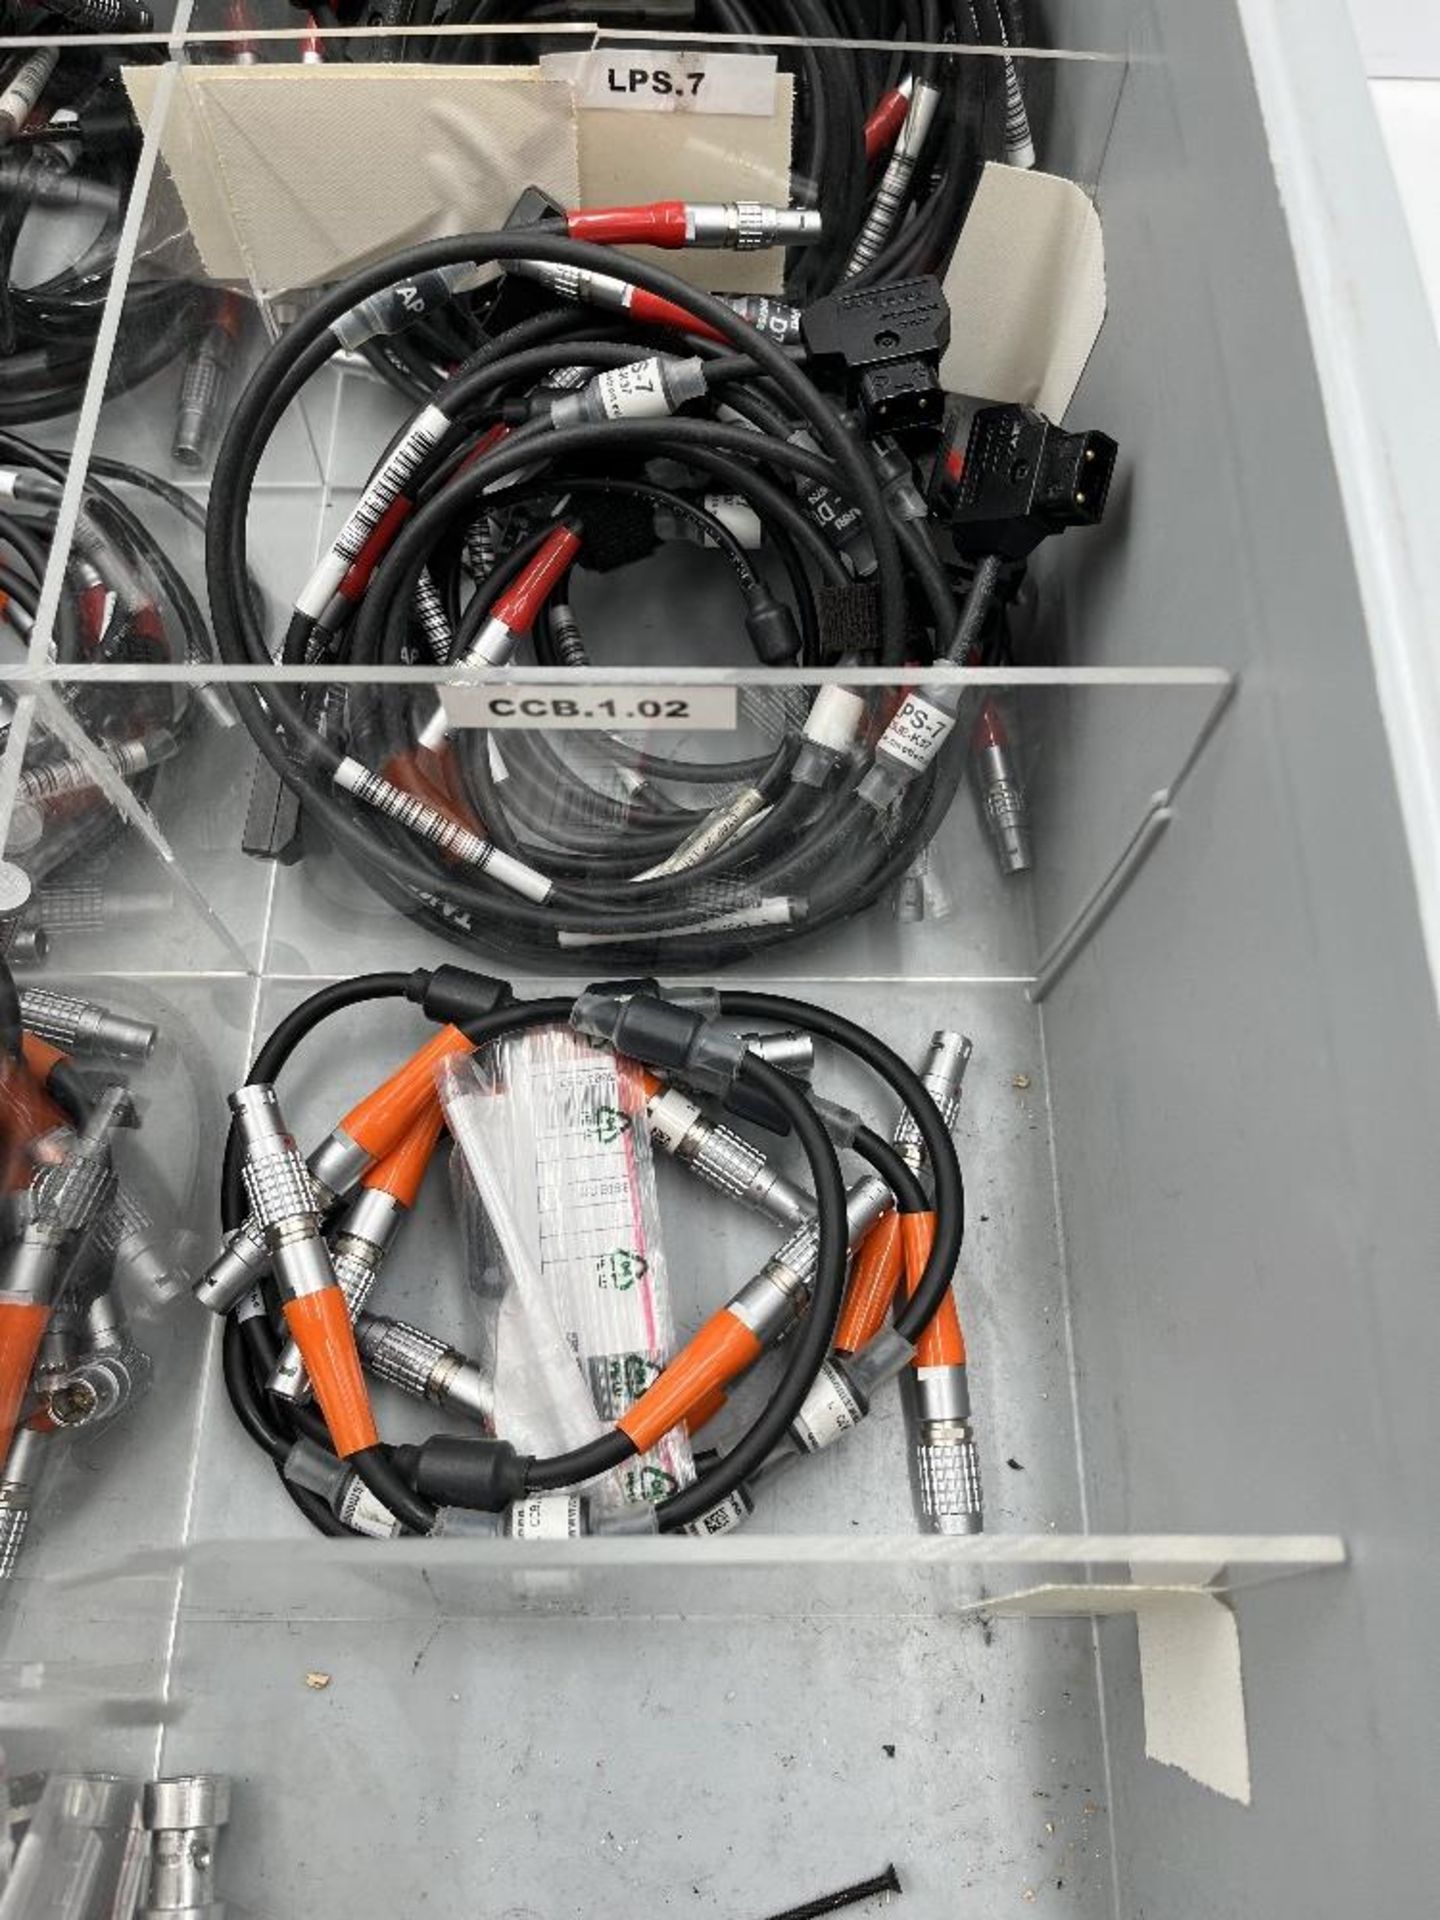 Quantity of CBUS to Cam Racer, LPS & CCB Cables - Image 3 of 7